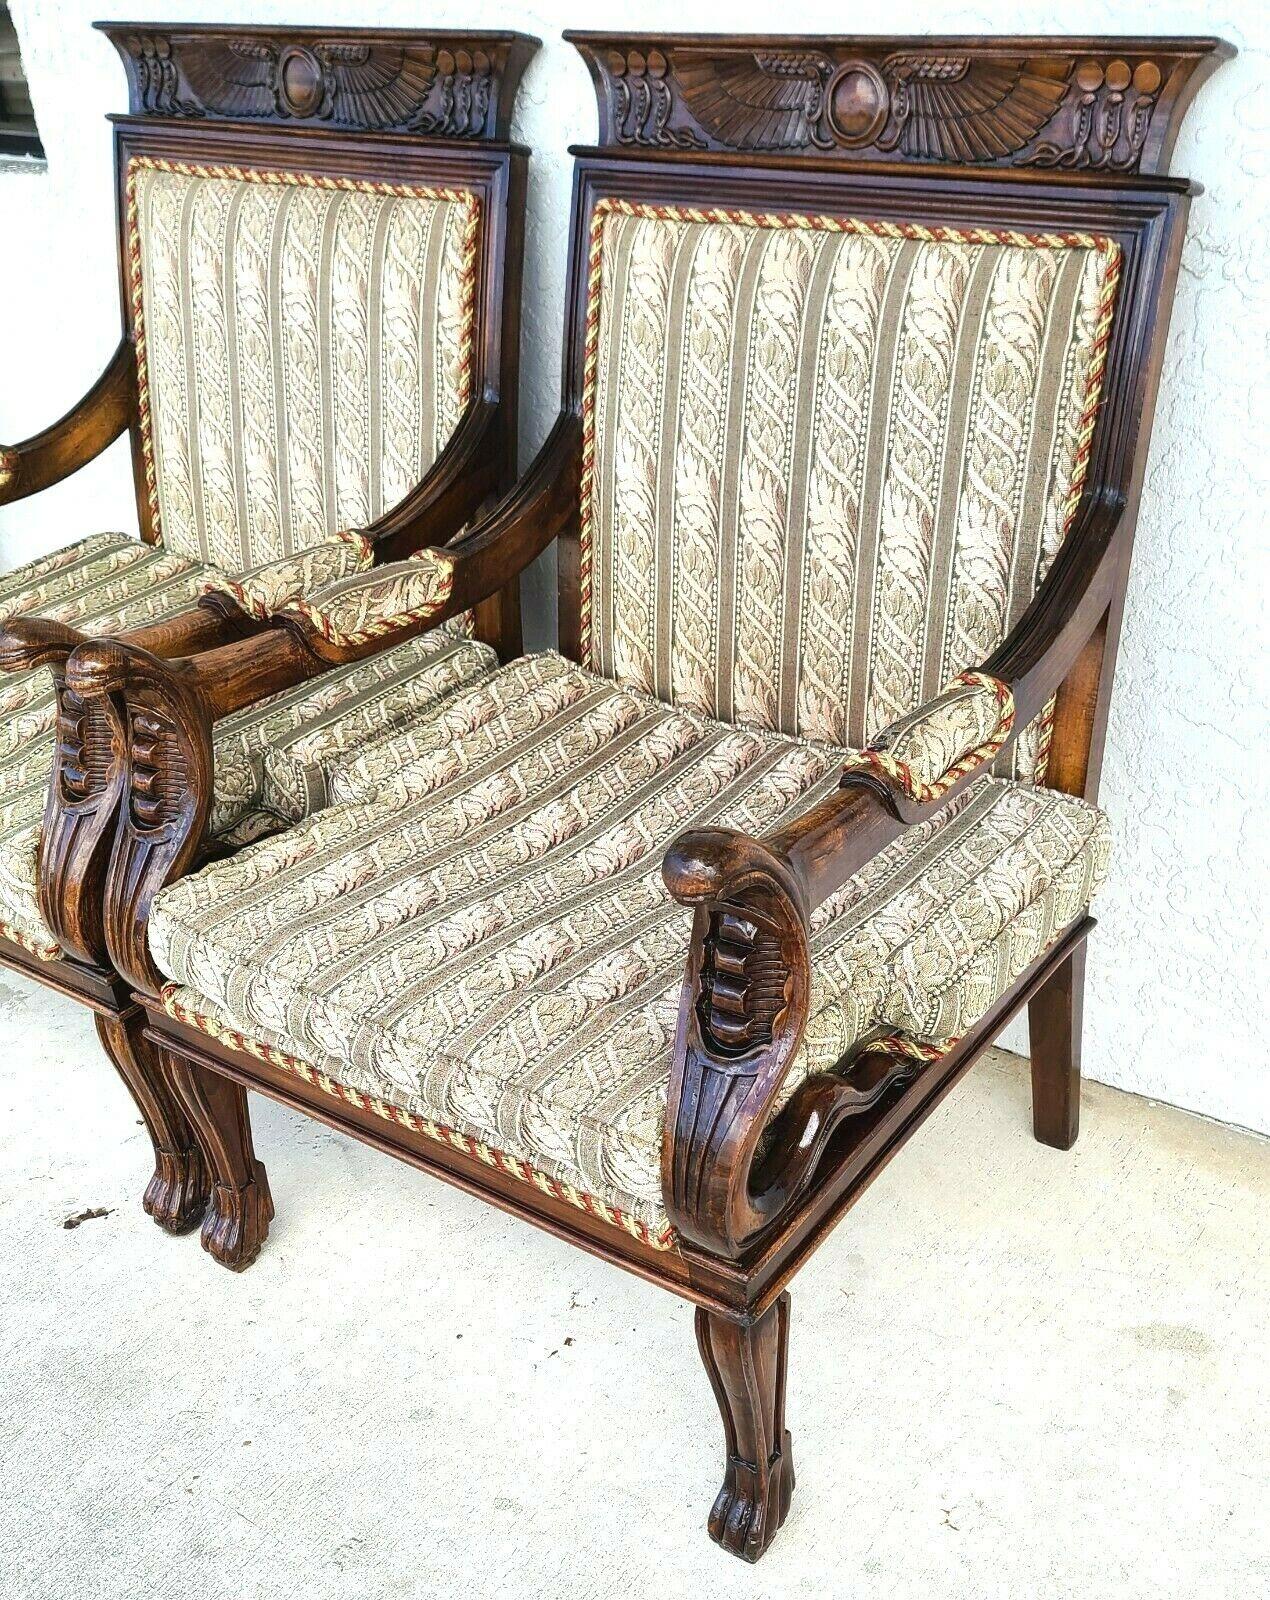 For full item description be sure to click on CONTINUE READING at the bottom of this listing.

Offering one of our recent palm beach estate fine furniture acquisitions of a
Pair of Antique Egyptian Revival Carved Cobra & Isis Wings Mahogany